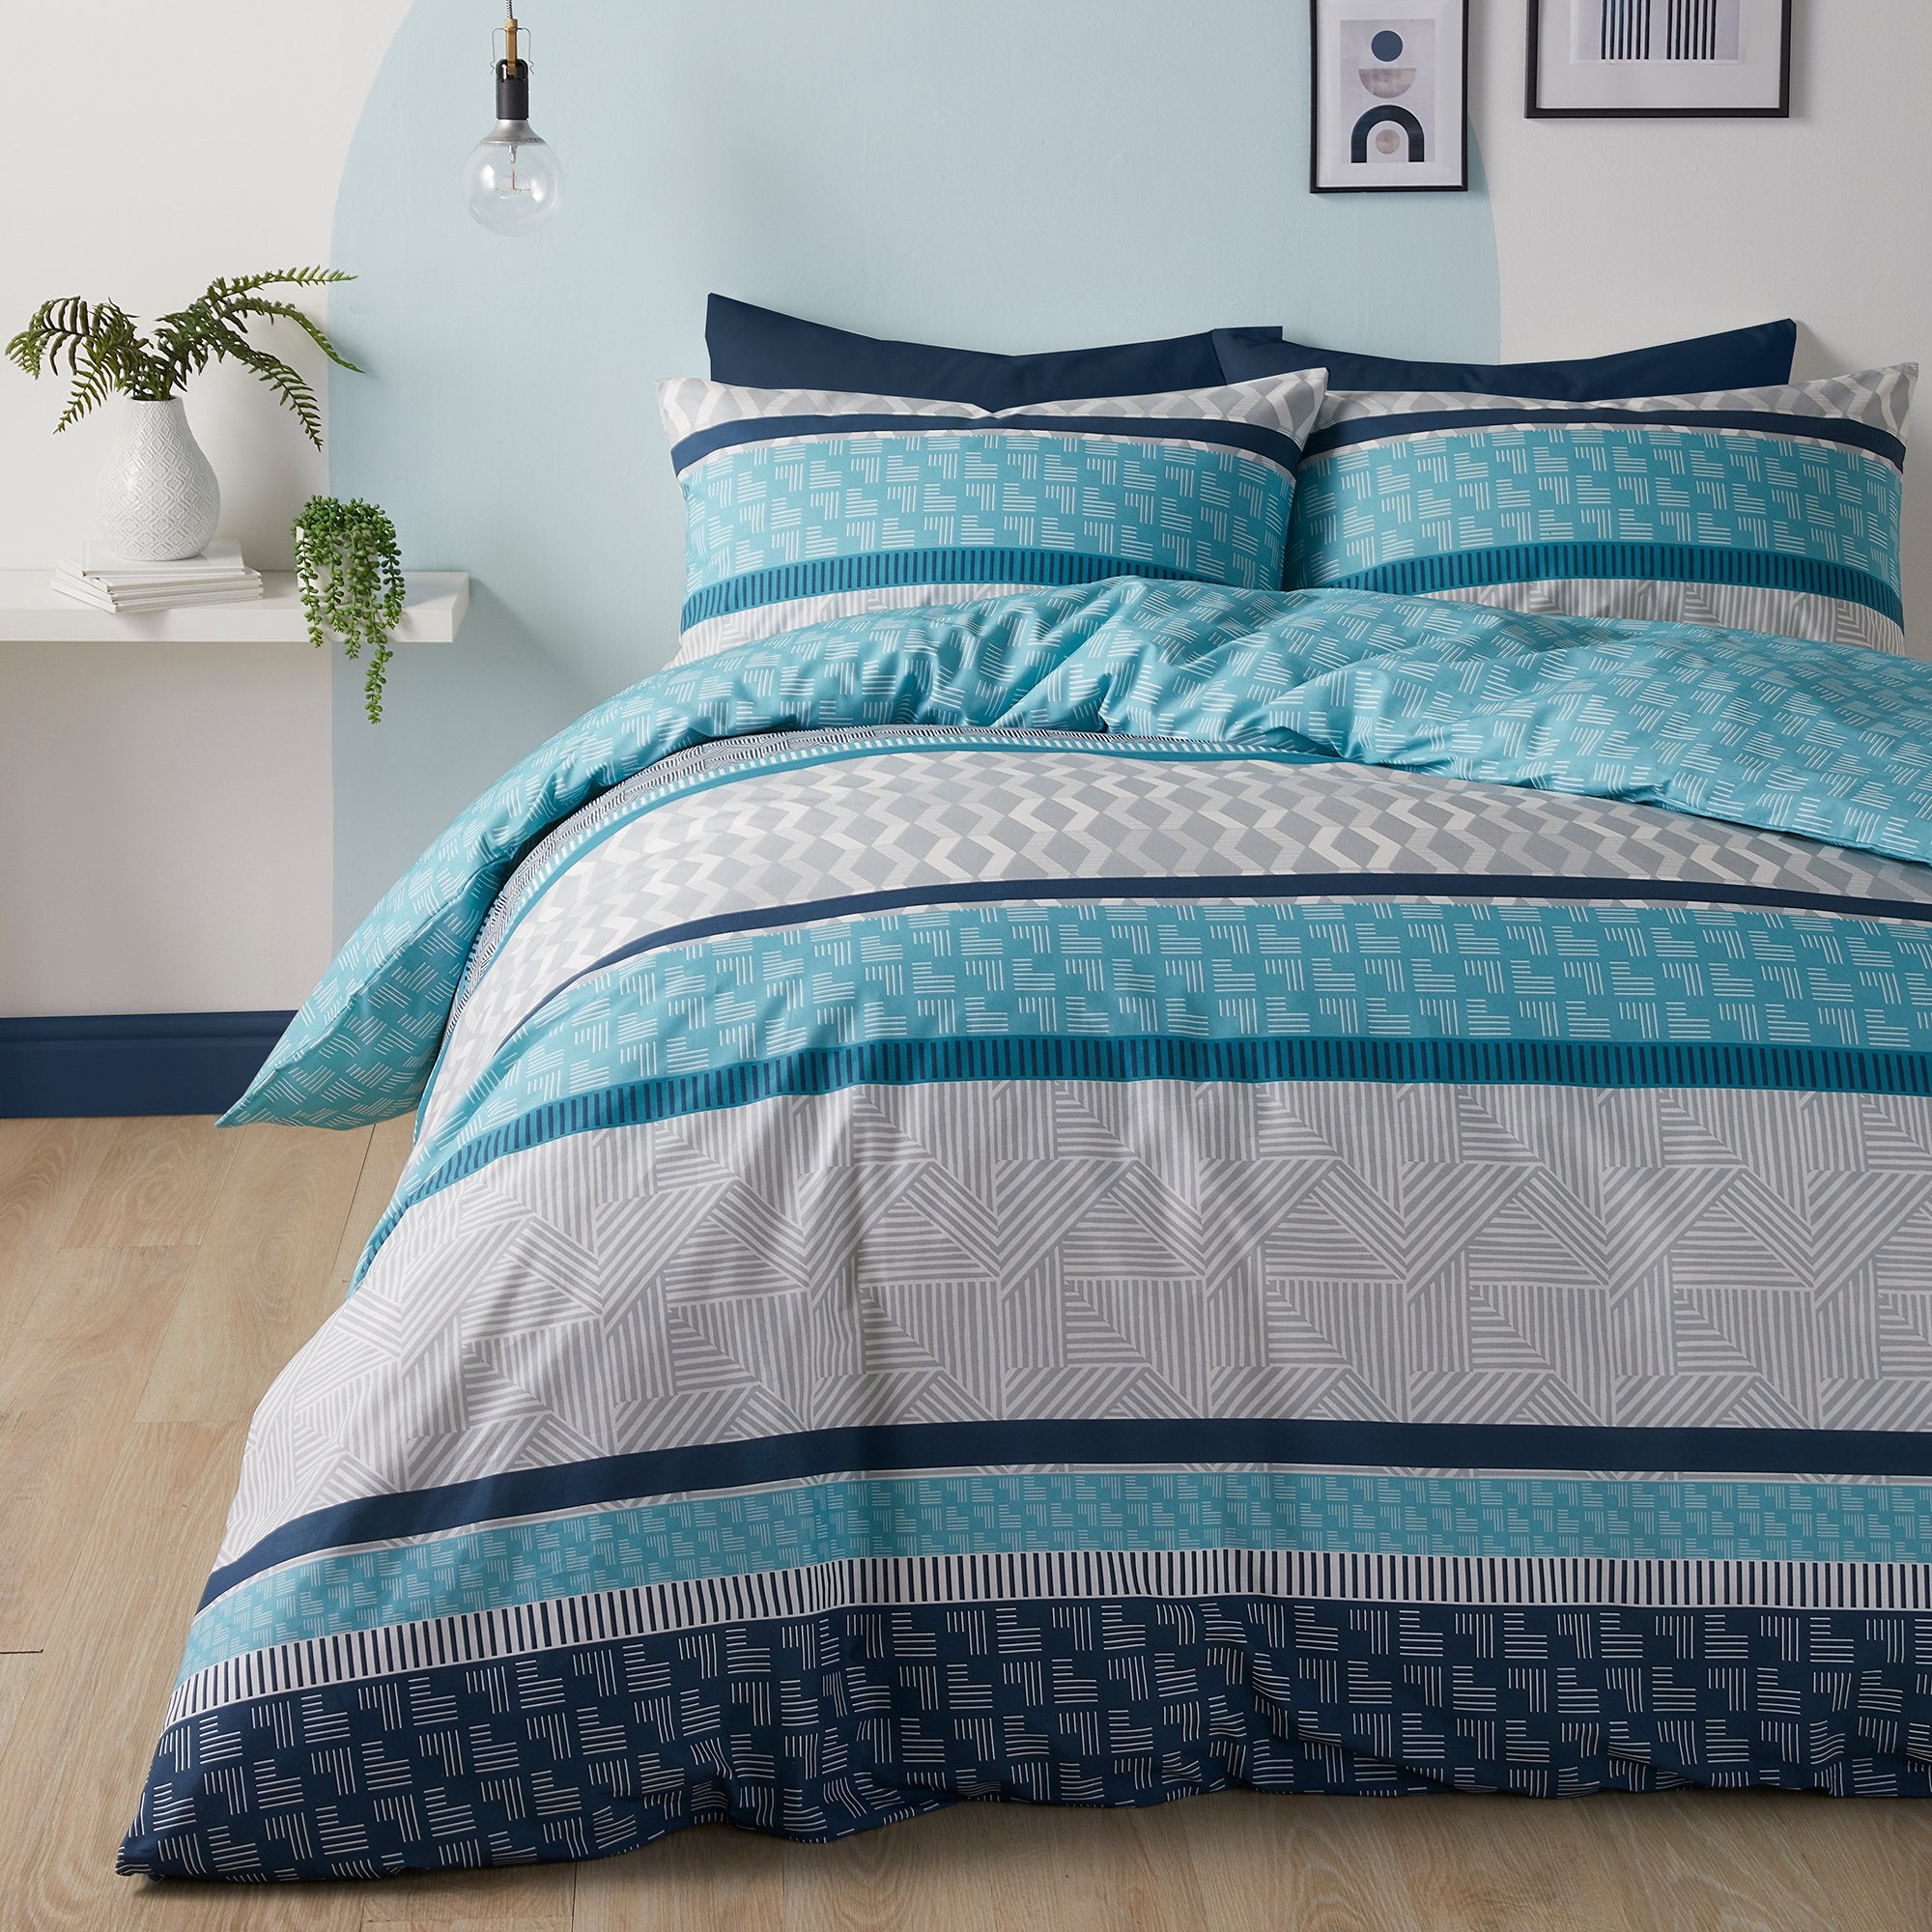 Duvet Cover Set Rico by Fusion in Teal